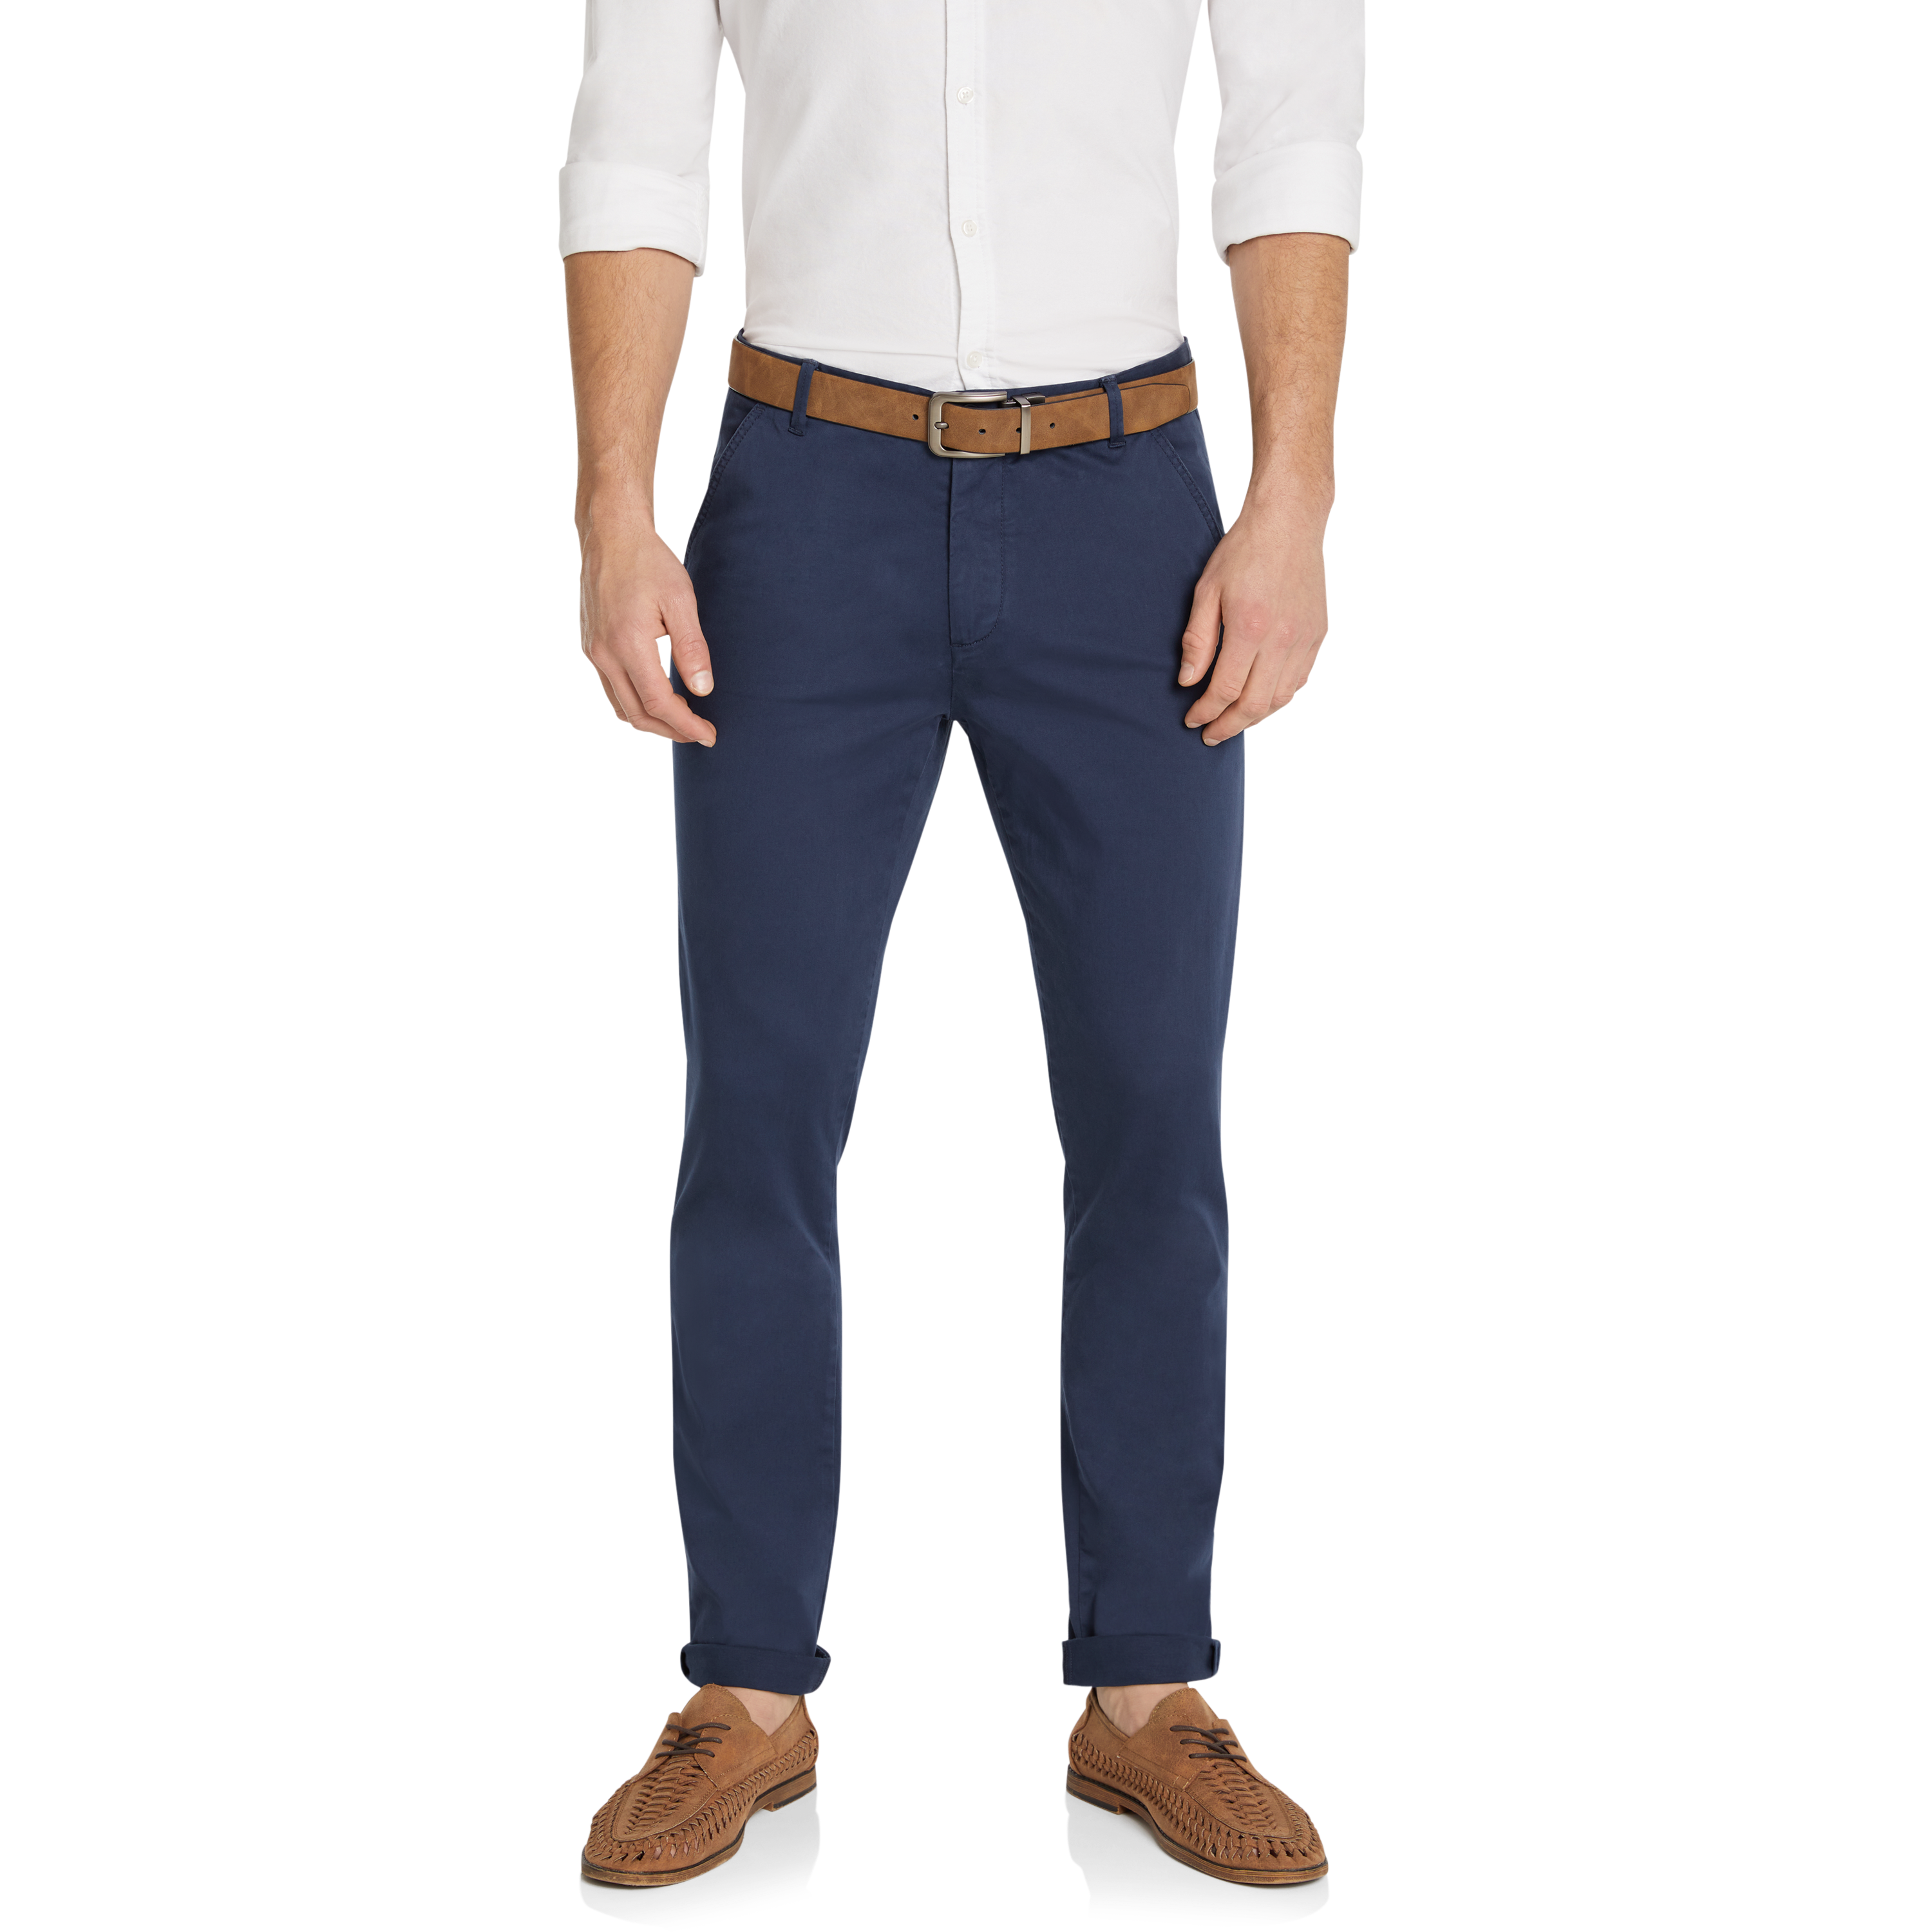 Athletic Ultimate Built-In Flex Chino Pants for Men - Old Navy Philippines